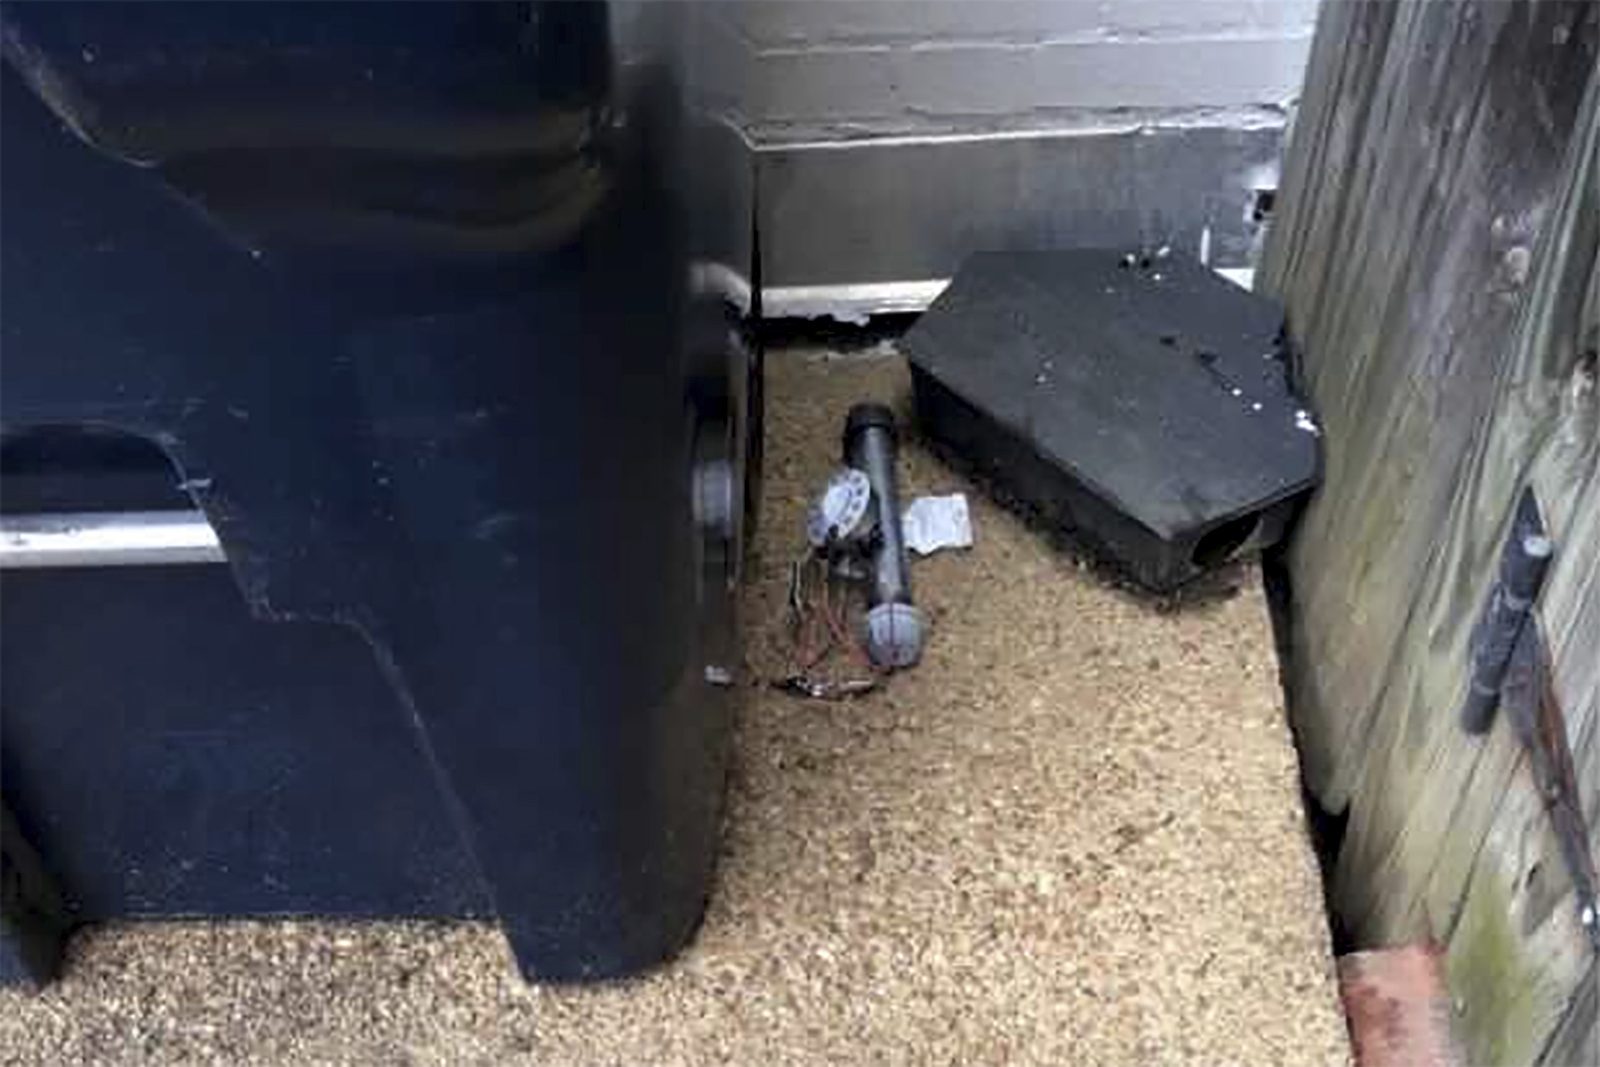 In this Jan. 6, 2021 photo, an explosive device is shown outside of the Republican National Committee office in Washington. The FBI has released new video showing someone placing two pipe bombs outside the offices of the Republican and Democratic national committees the night before the Jan. 6 riot at the U.S. Capitol. (AP Photo)